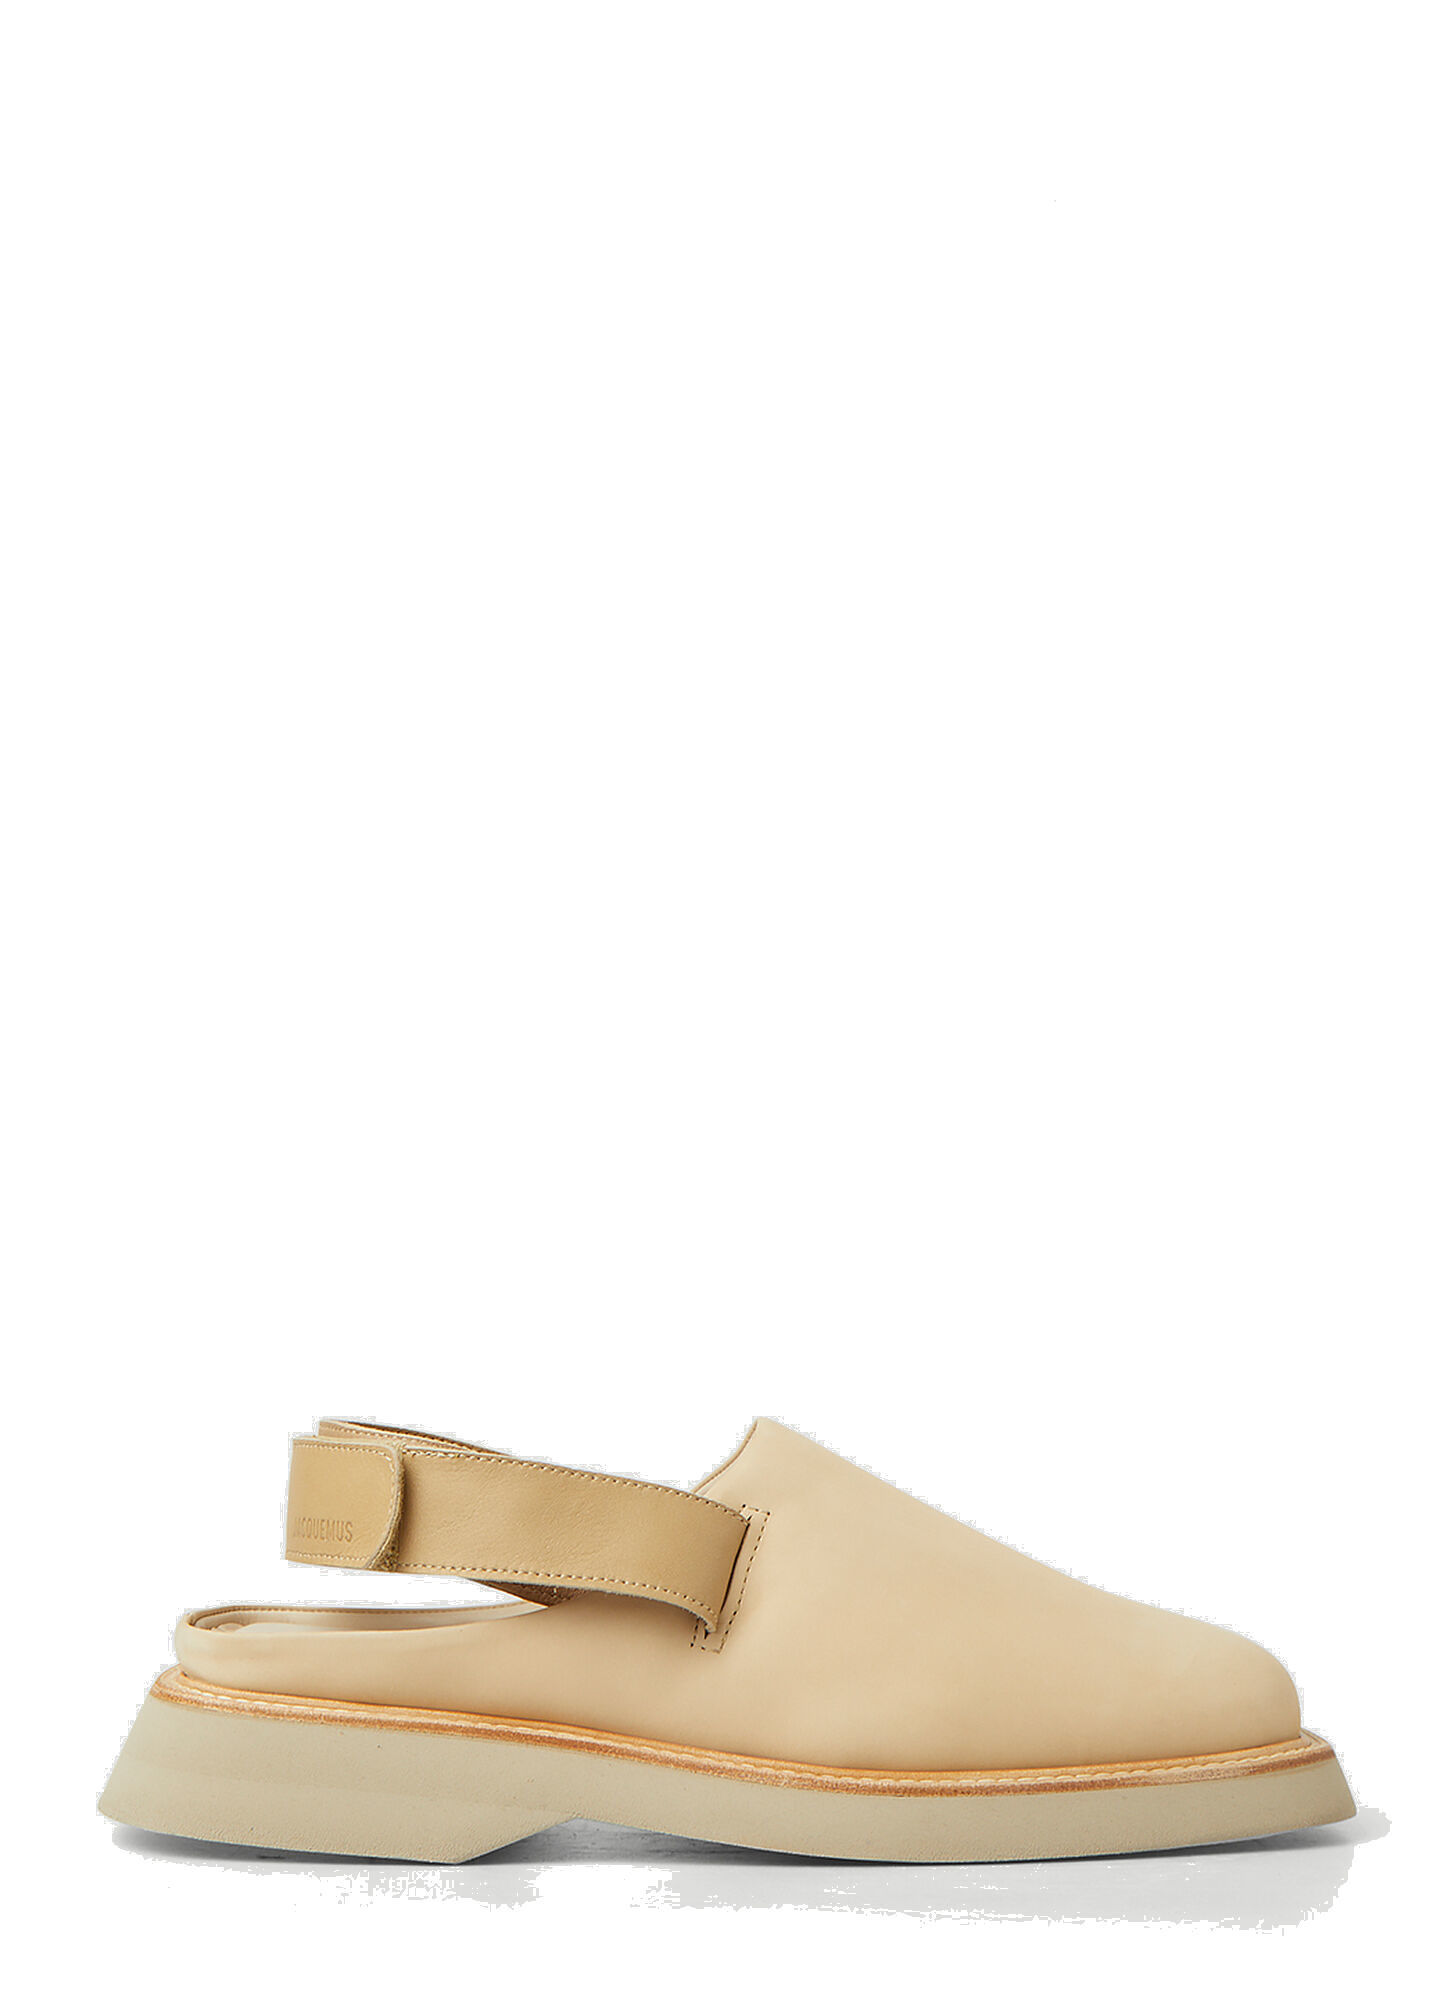 Photo: Les Mules Carre Shoes in Beige